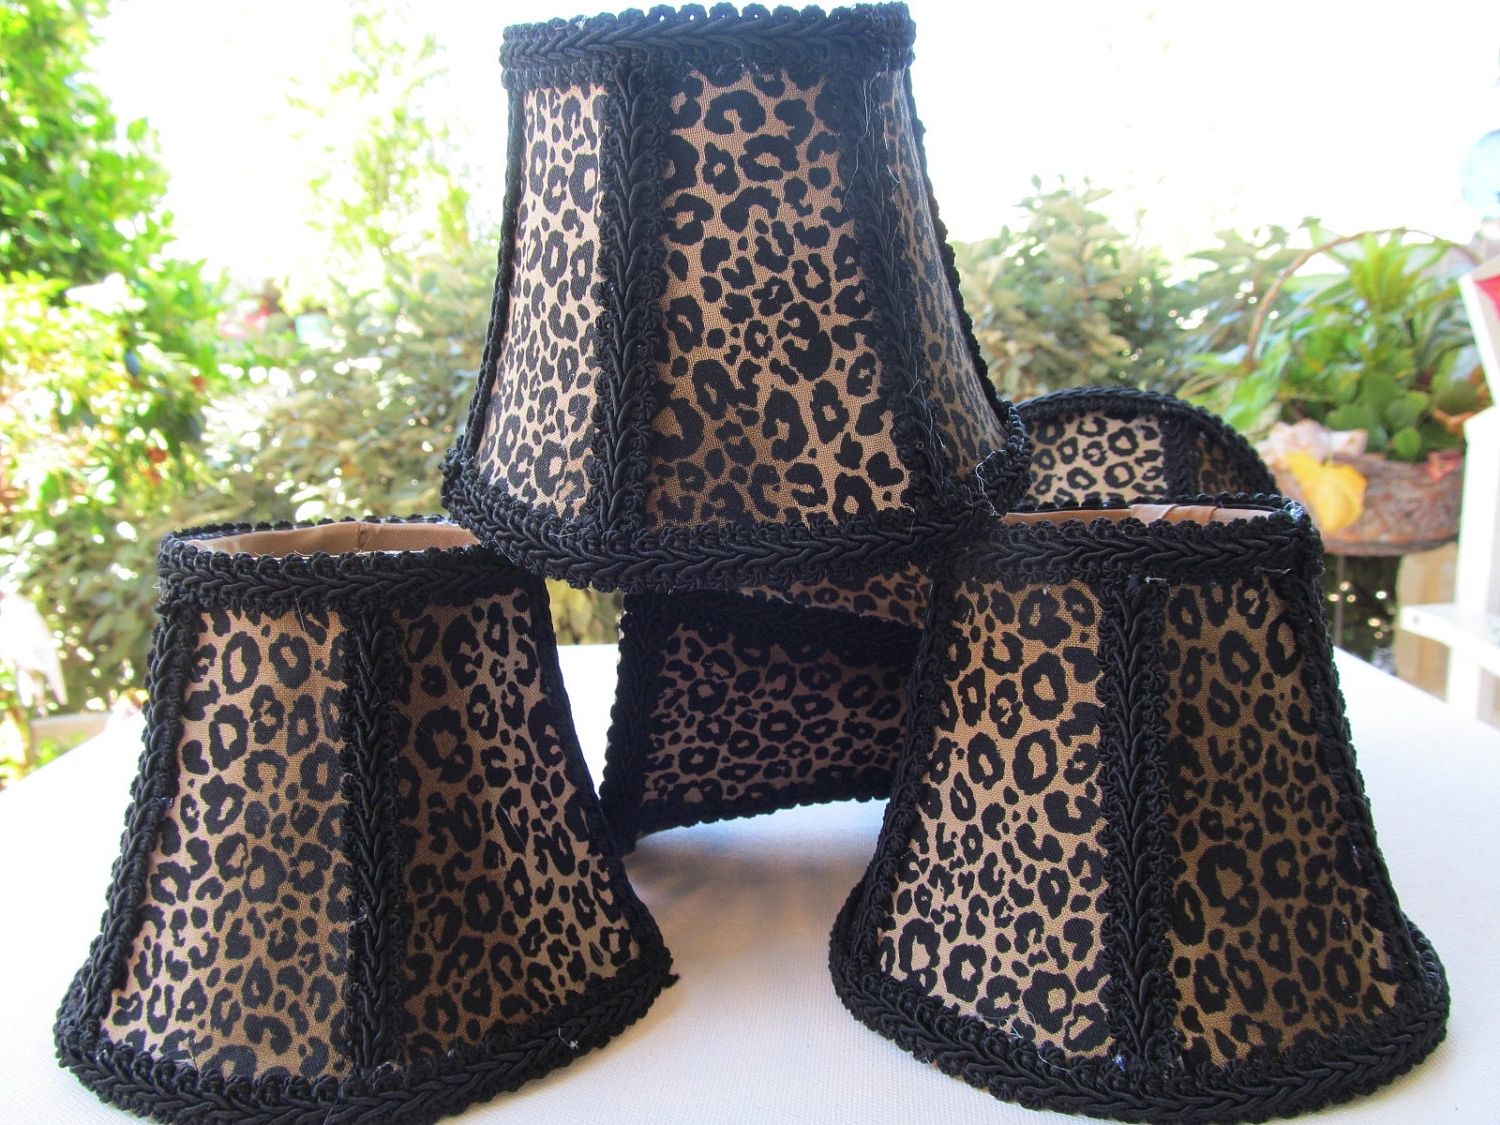 Most Popular Turquoise Chandelier Lamp Shades Intended For Furniture : Leopard Print Mini Lamp Shades Chandelier Girlsforever (View 20 of 20)